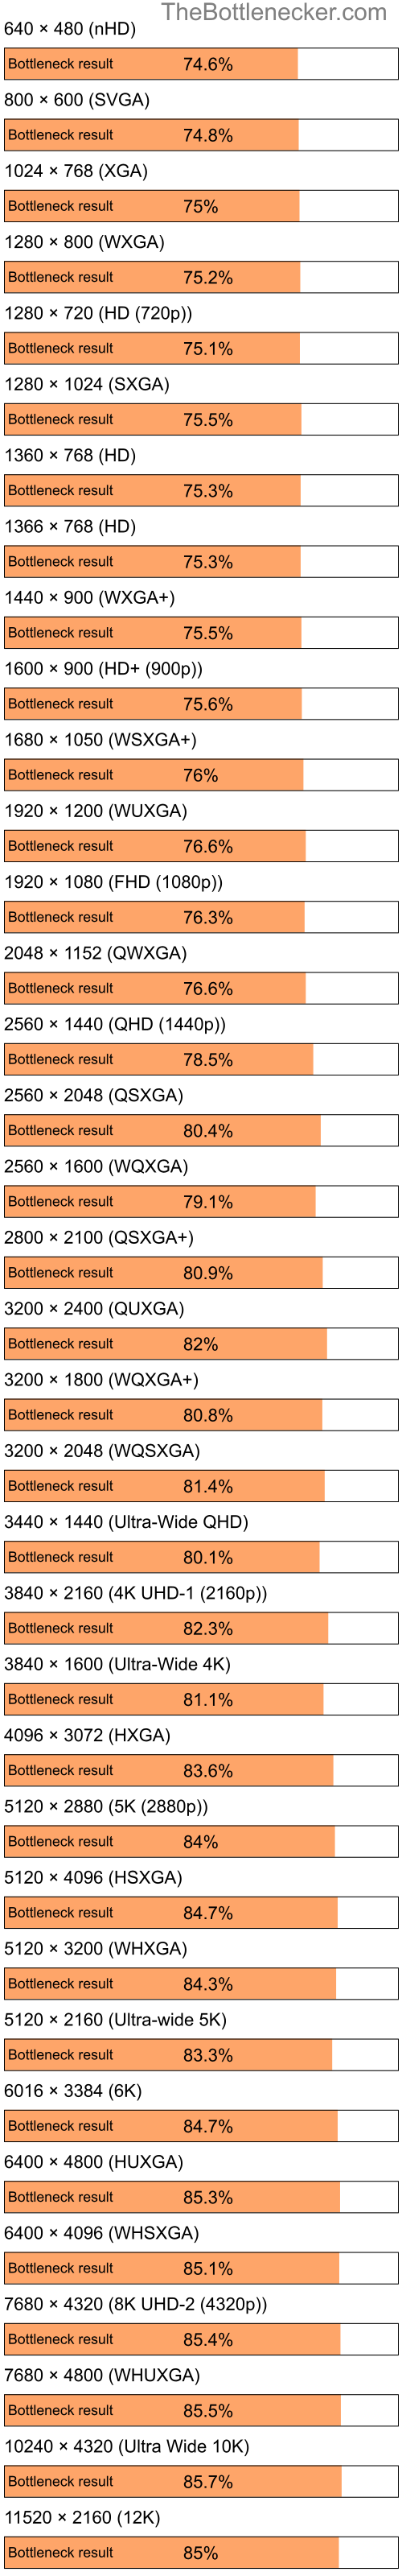 Bottleneck results by resolution for Intel Atom Z520 and AMD Mobility Radeon HD 4225 in Graphic Card Intense Tasks